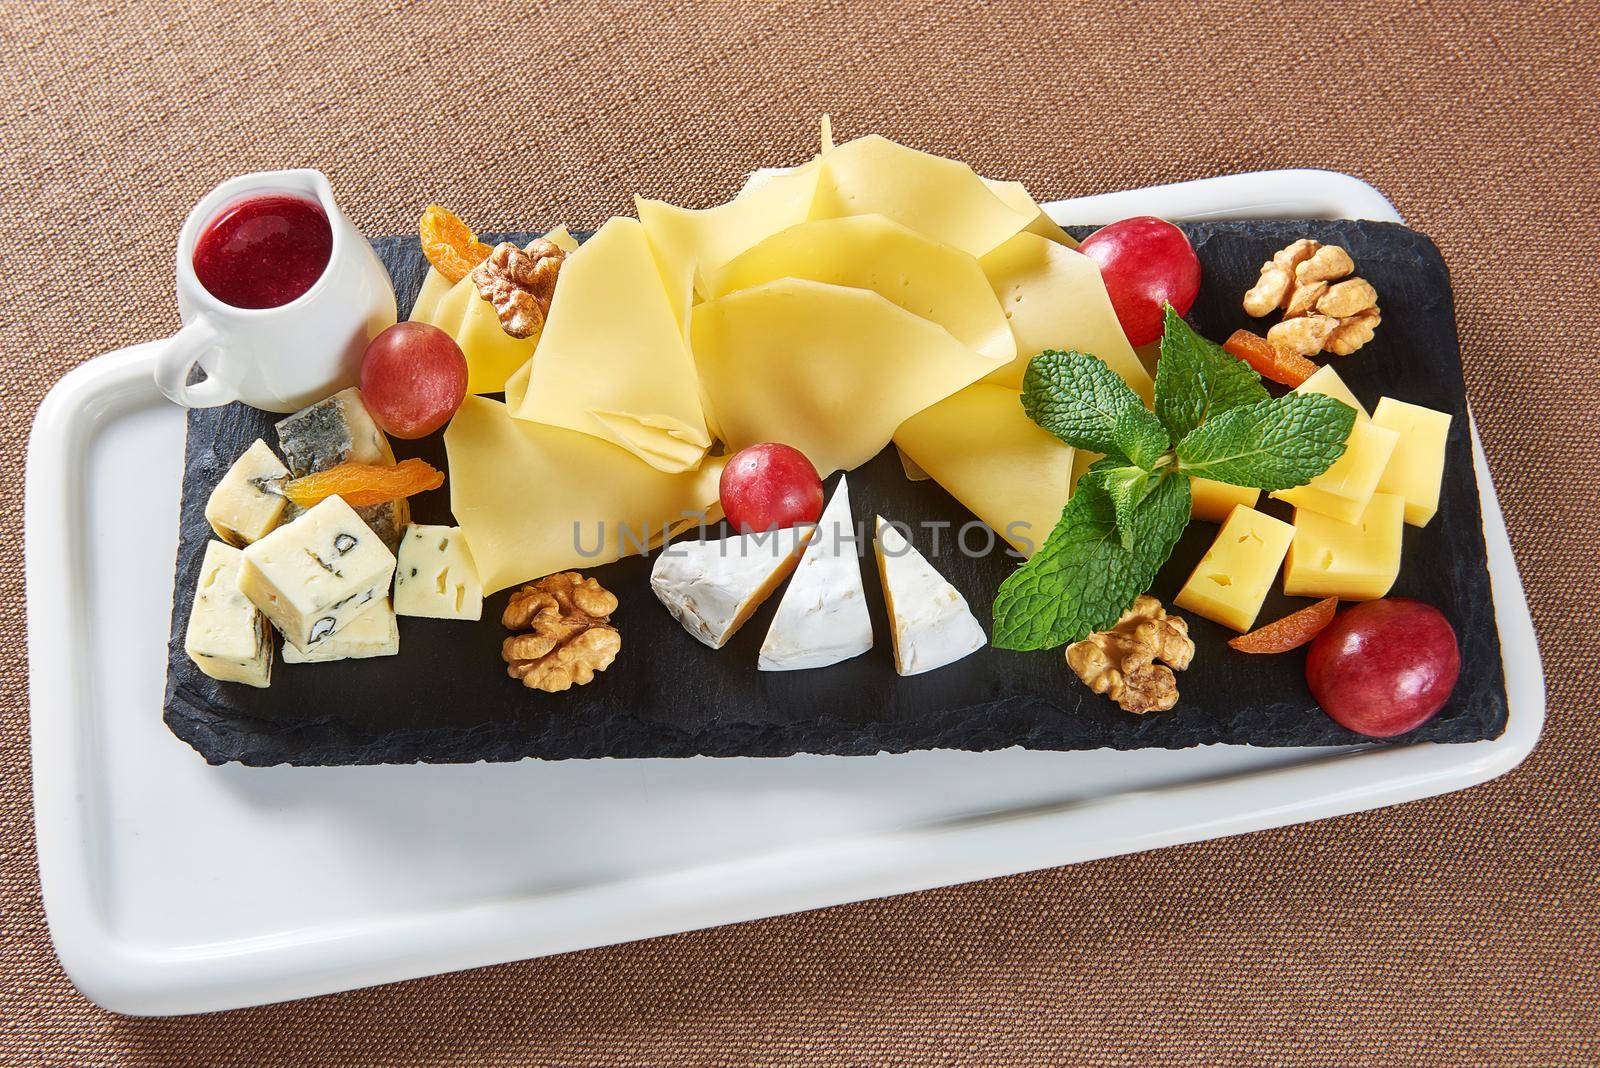 Appetizers served. Top view of a cheese plate with Gouda cheese brie blue cheese walnuts grapes and a little jar of jam